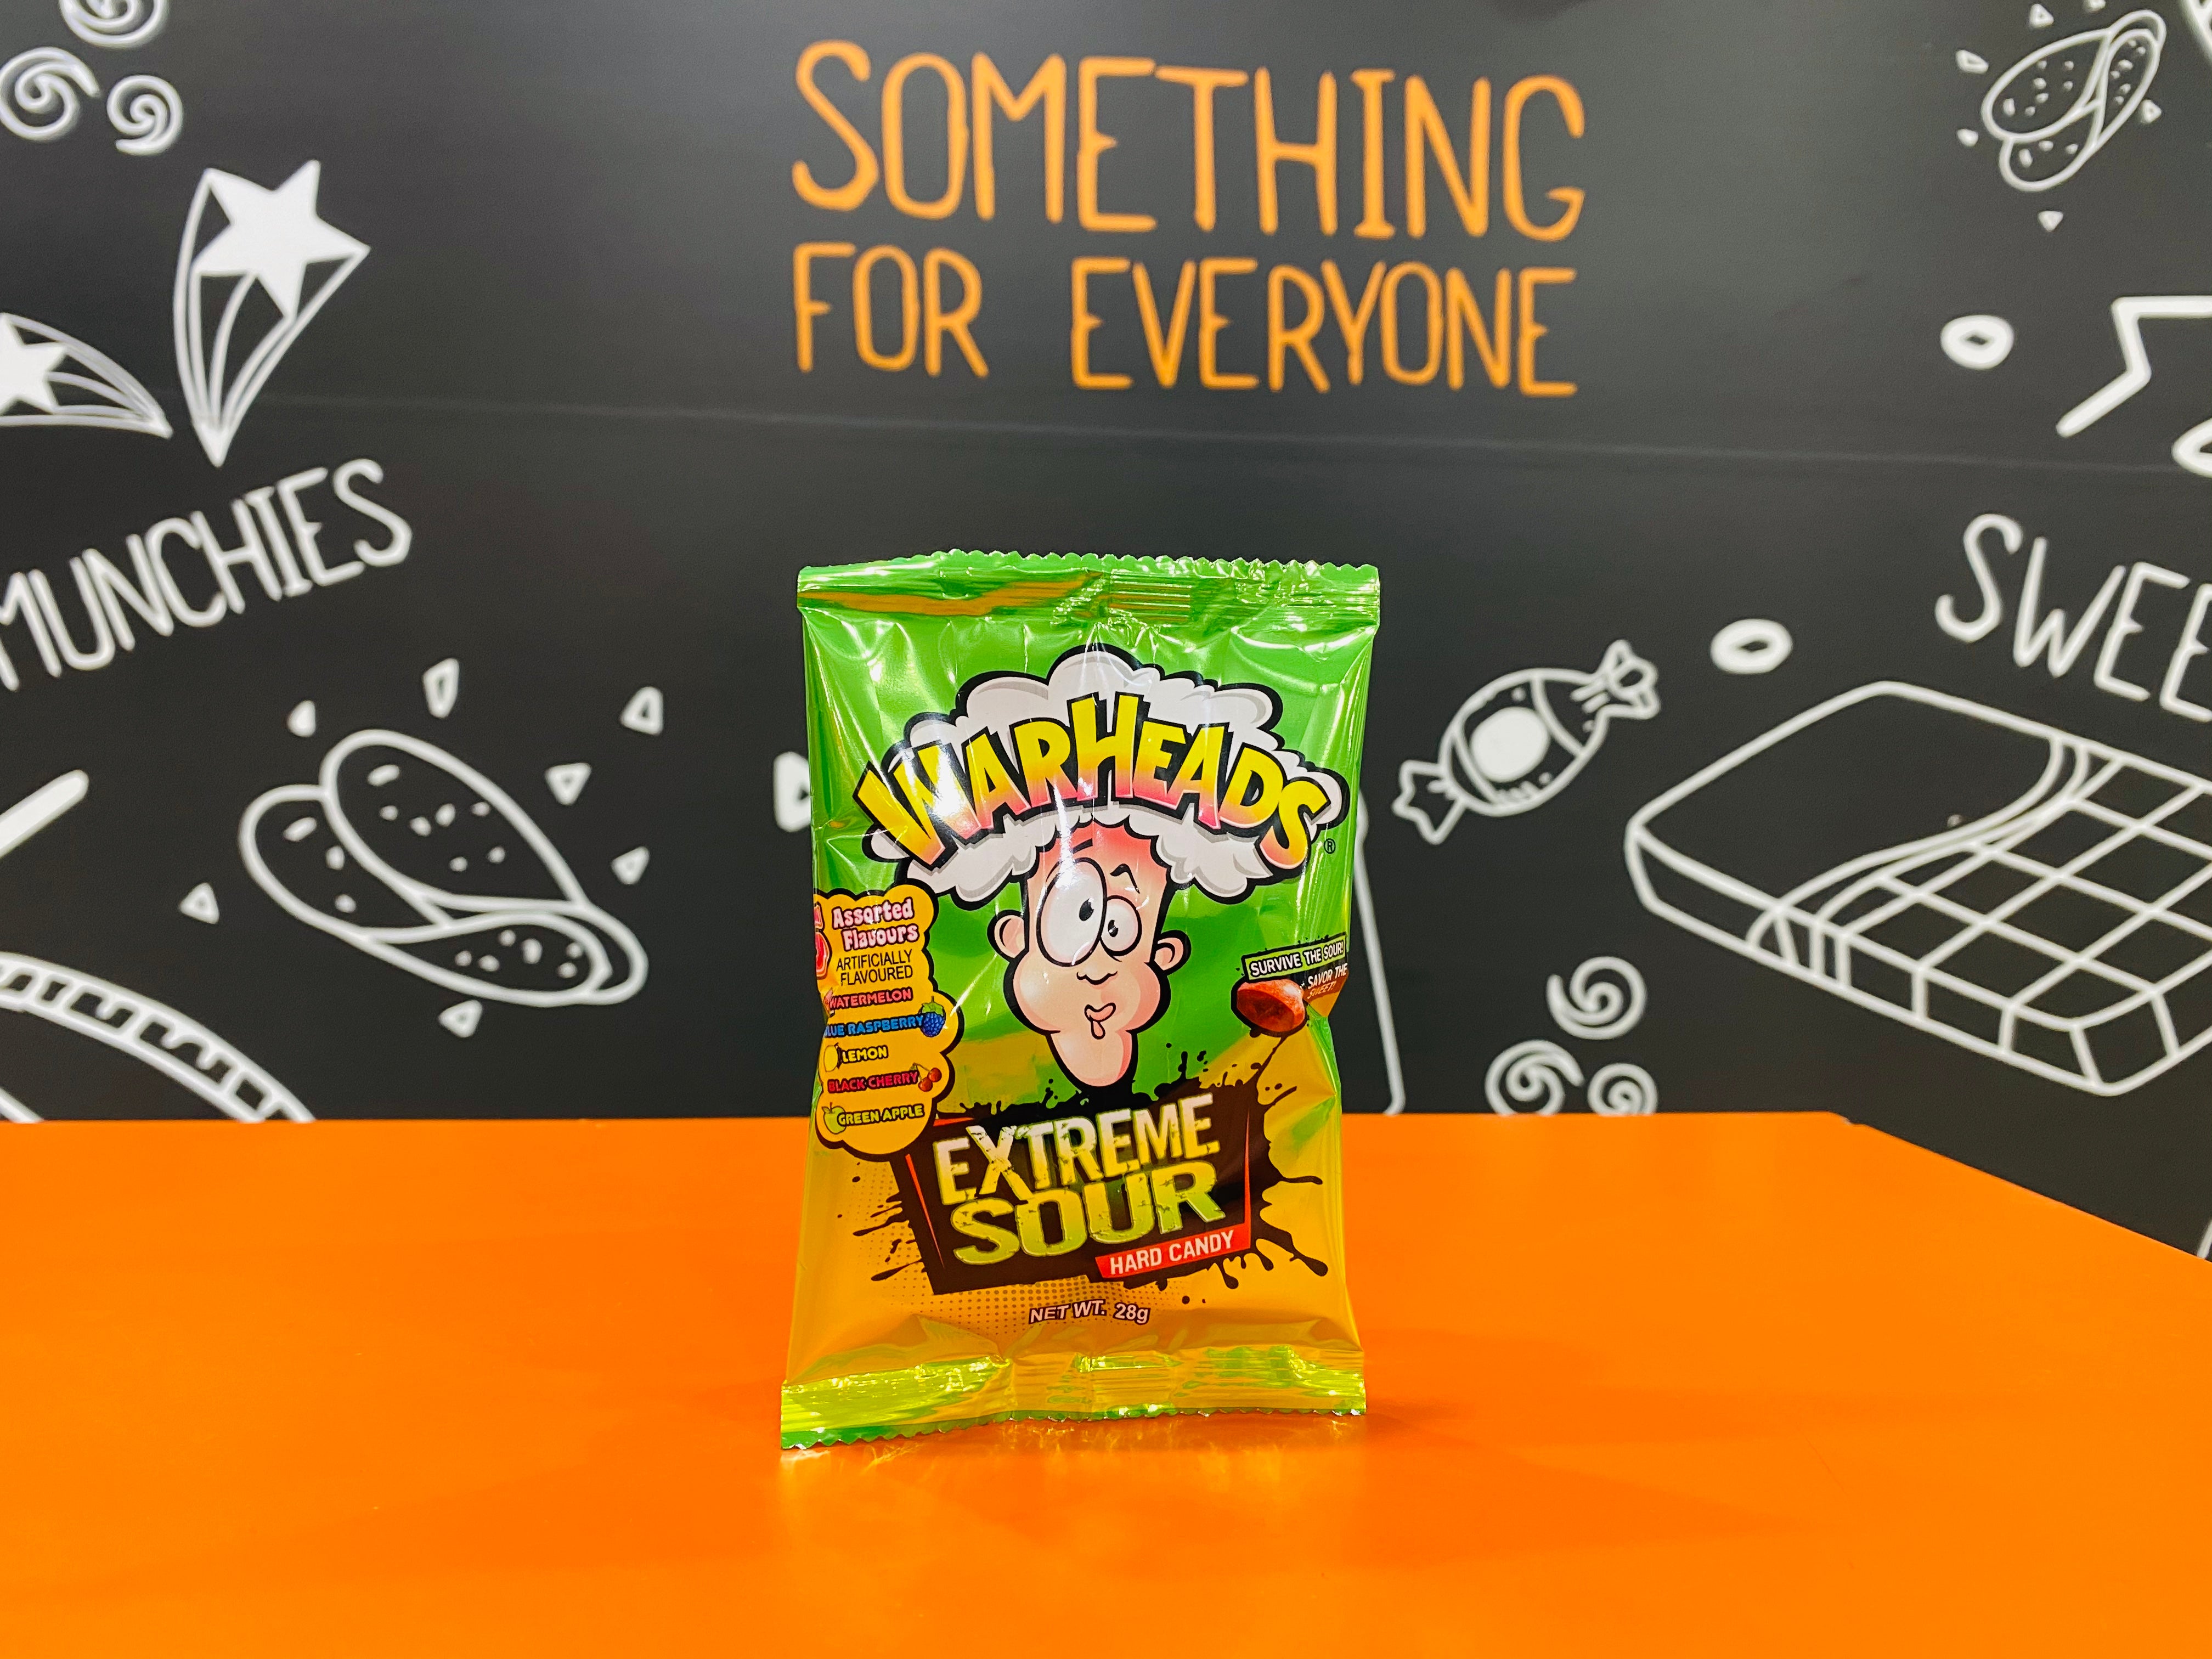 Warheads Extreme Sour 28g